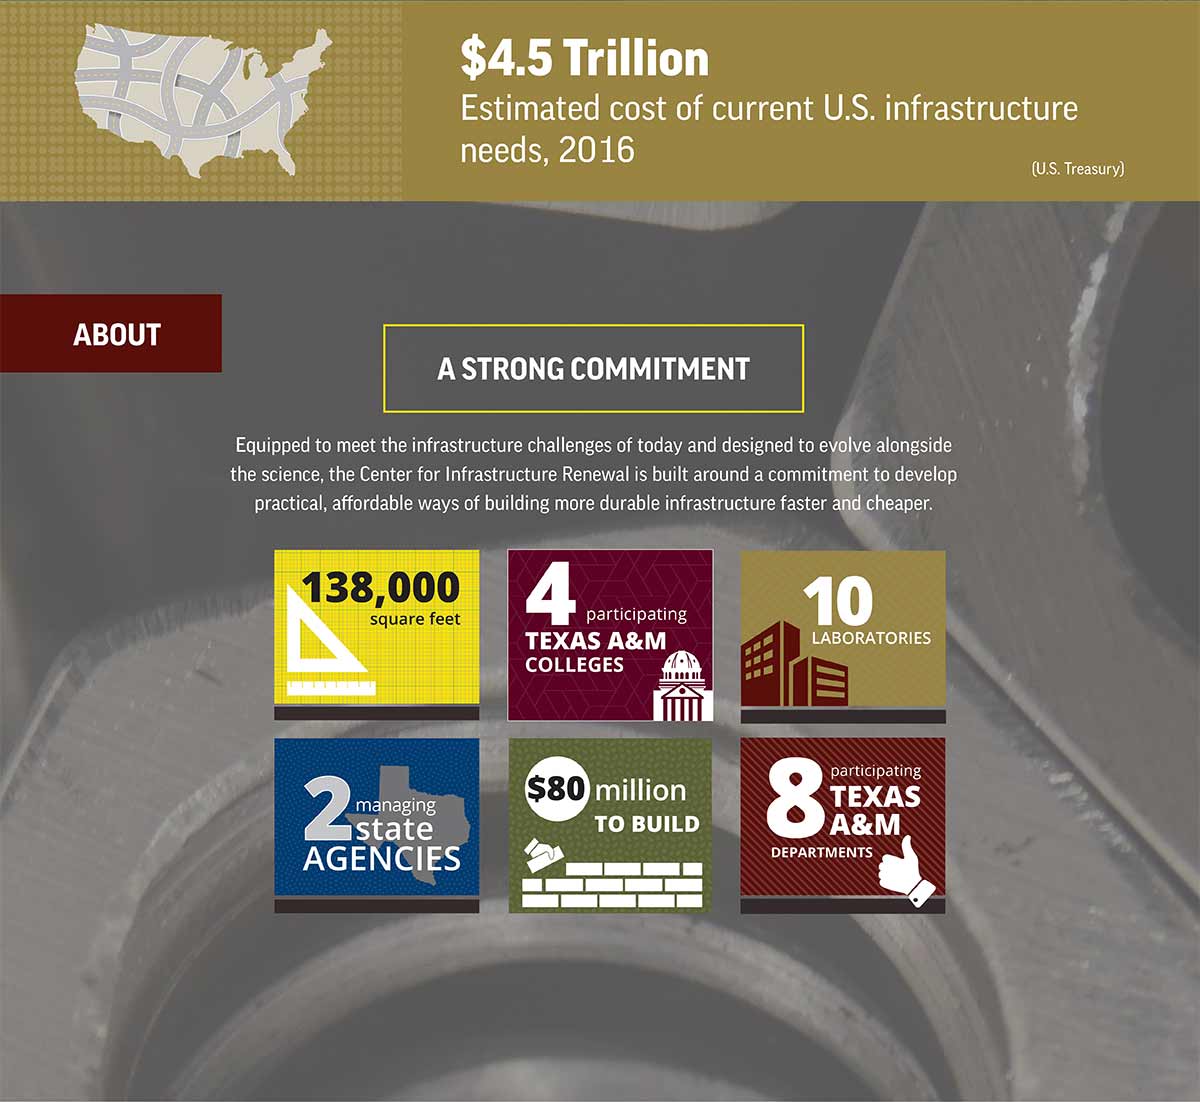 $4.5 Trillion estimated cost of current U.S. infrastructure needs, 2016 - About - facts about the CIR